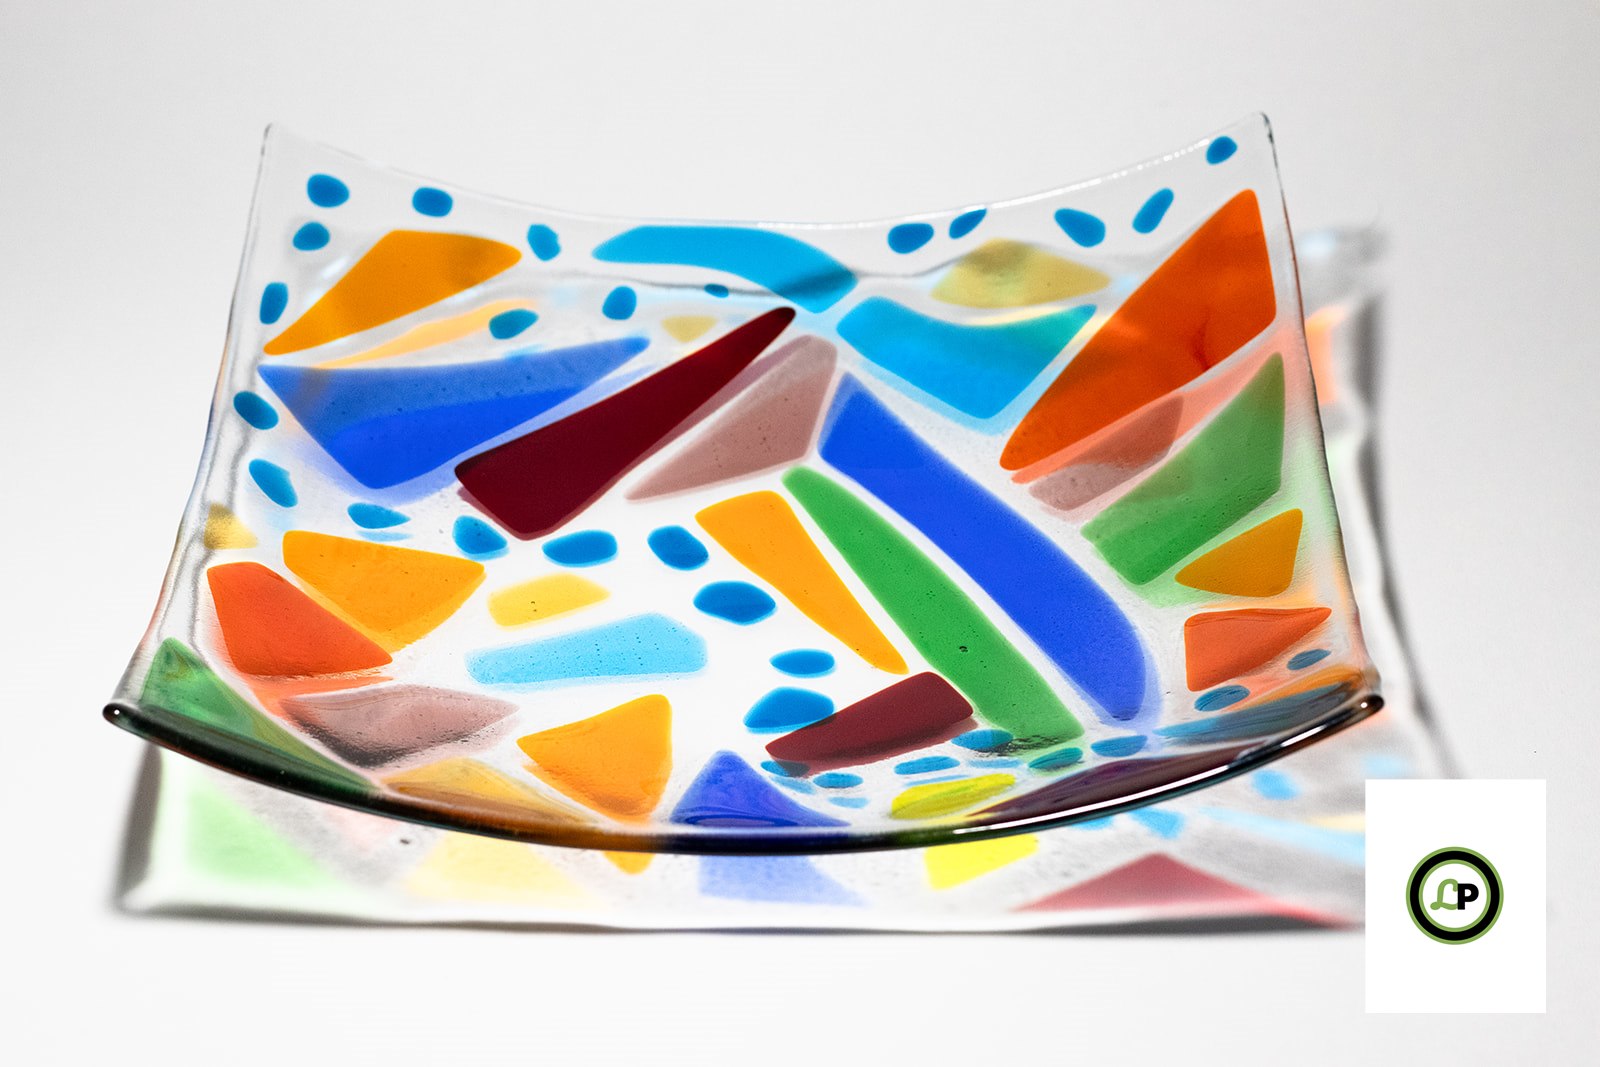 clear plate with transparent glass pieces